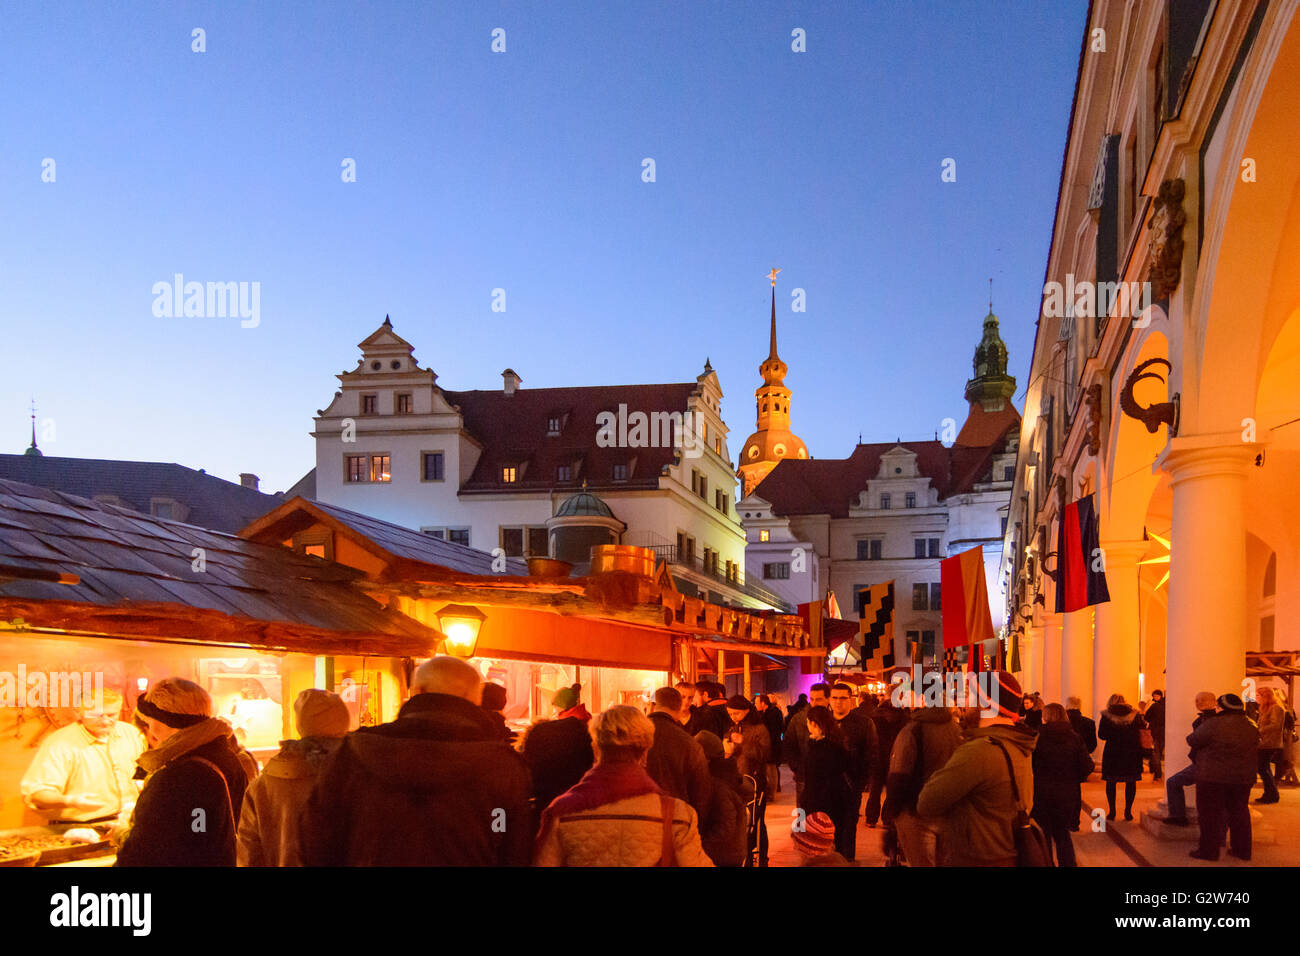 Medieval Christmas Market in Stallhof (stable yard) of the castle with view of the castle and Hausmannsturm, Germany, Dresden Stock Photo